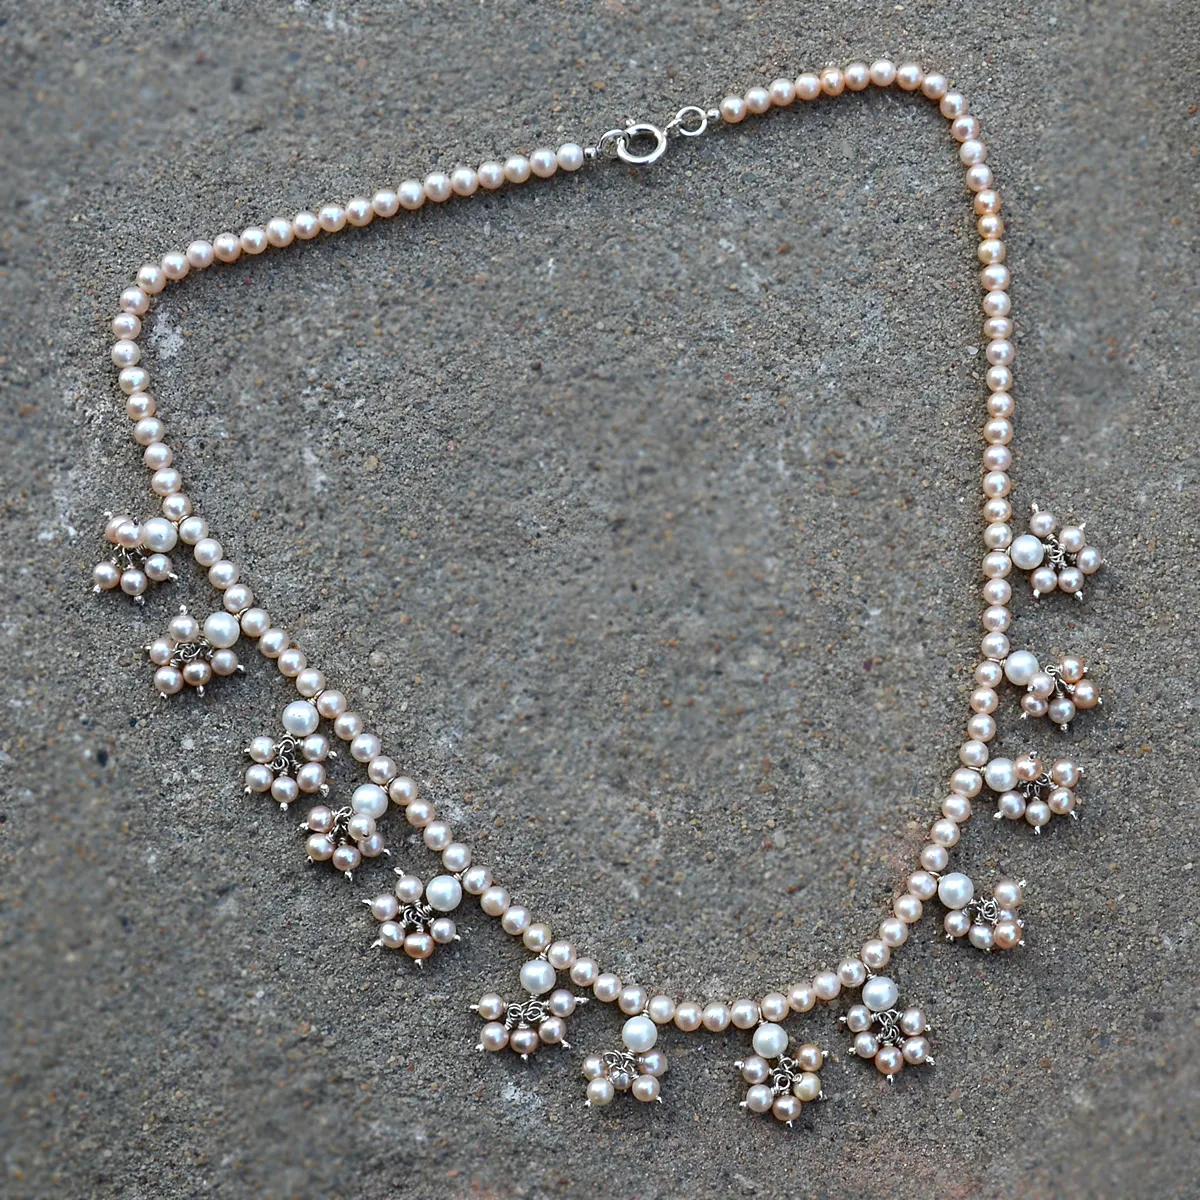 Pearl Bead Necklace 4ミリメートル真珠とNecklace真珠チャームタッセルペンダントWell格好Necklace Best Exporter